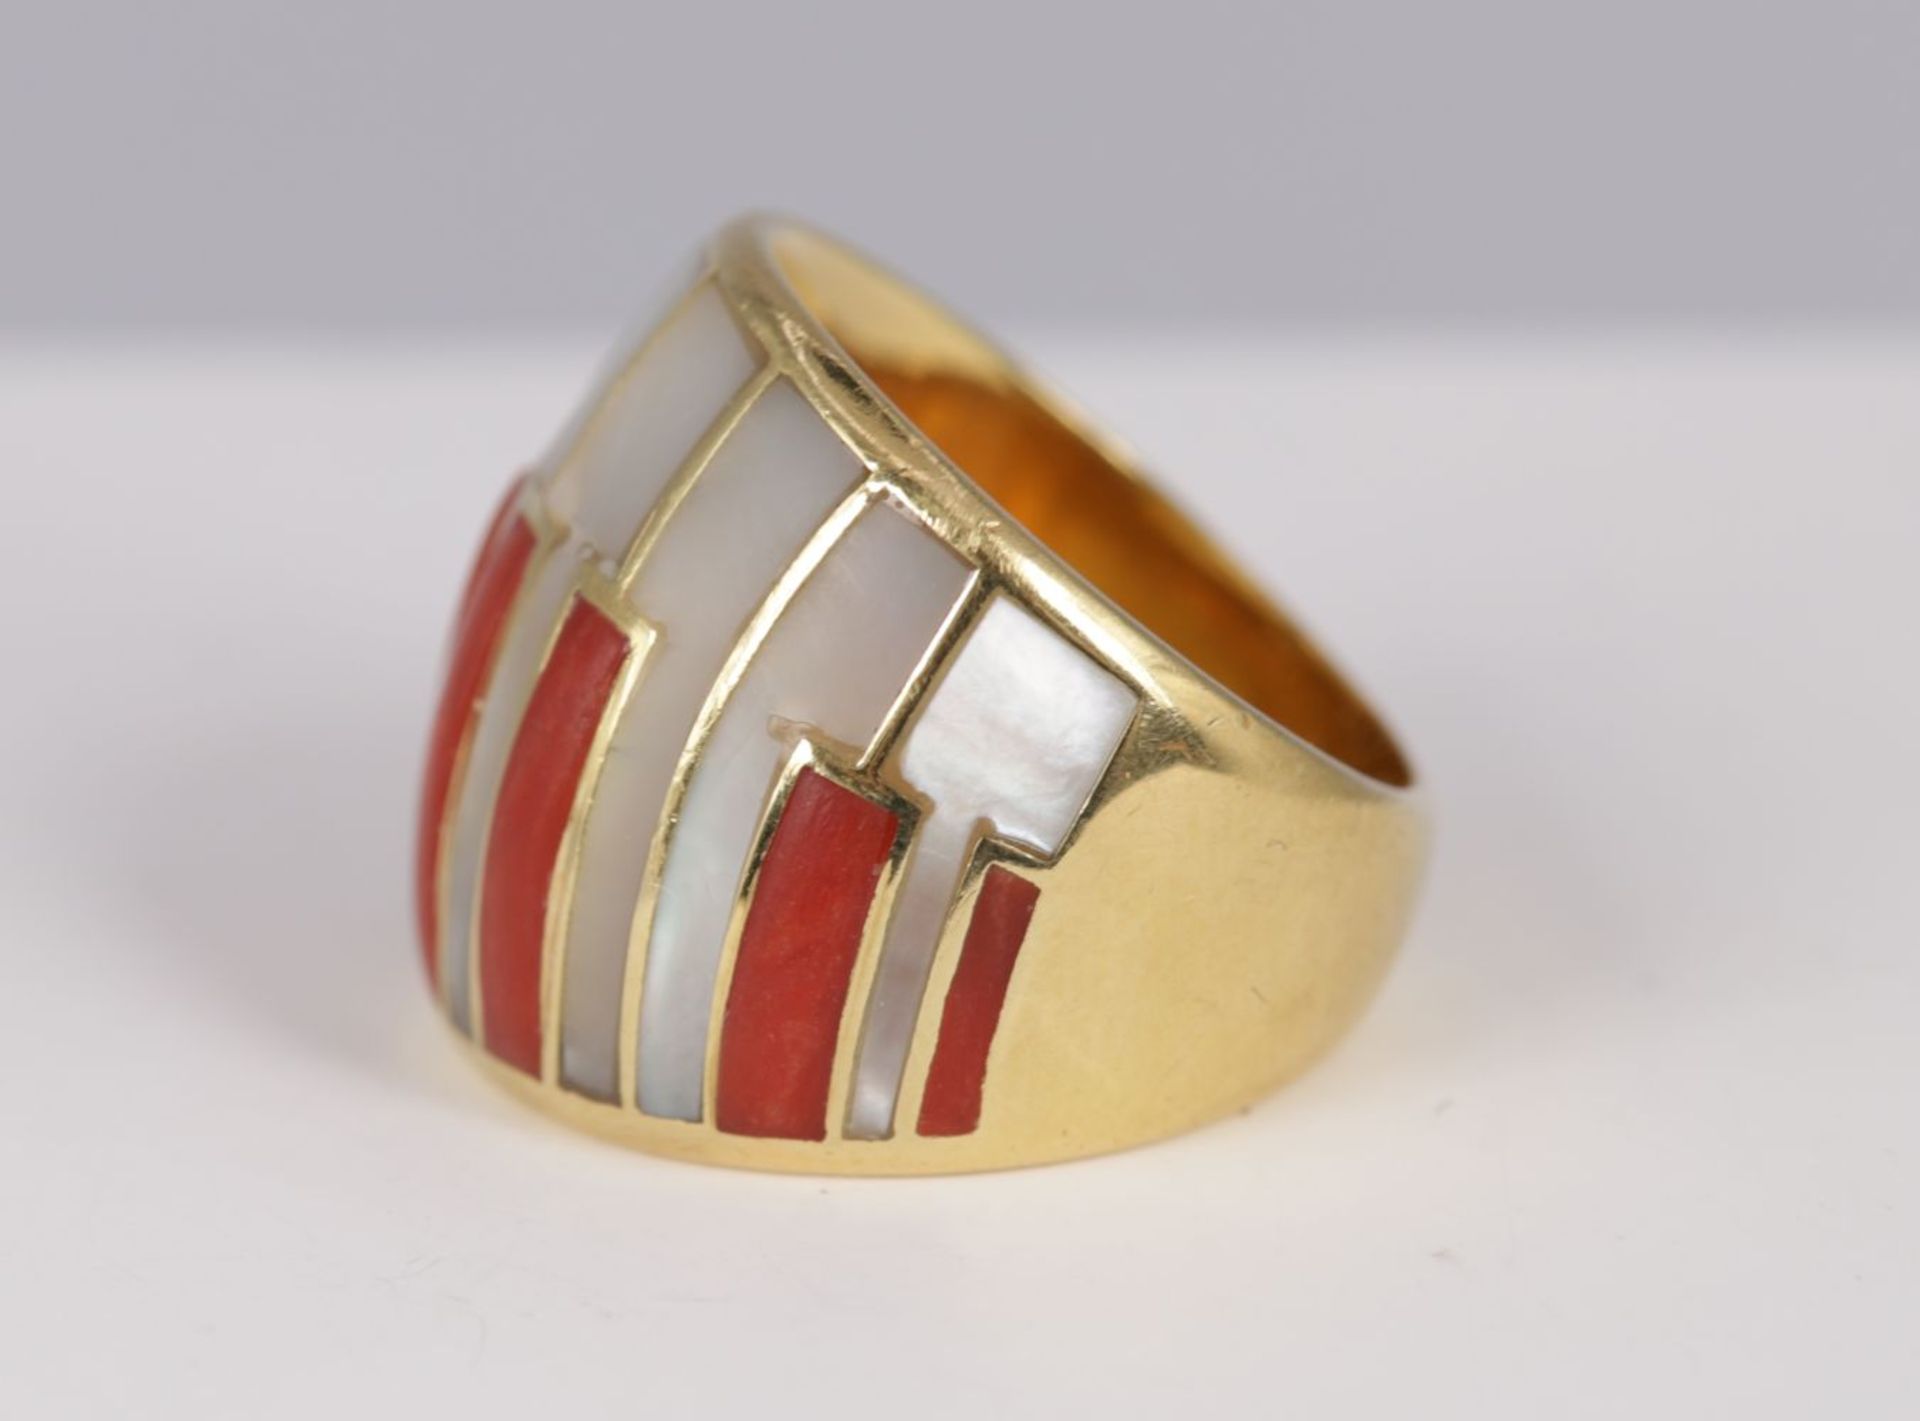 18K YELLOW GOLD & MOTHER O'PEARL RING - Image 2 of 3